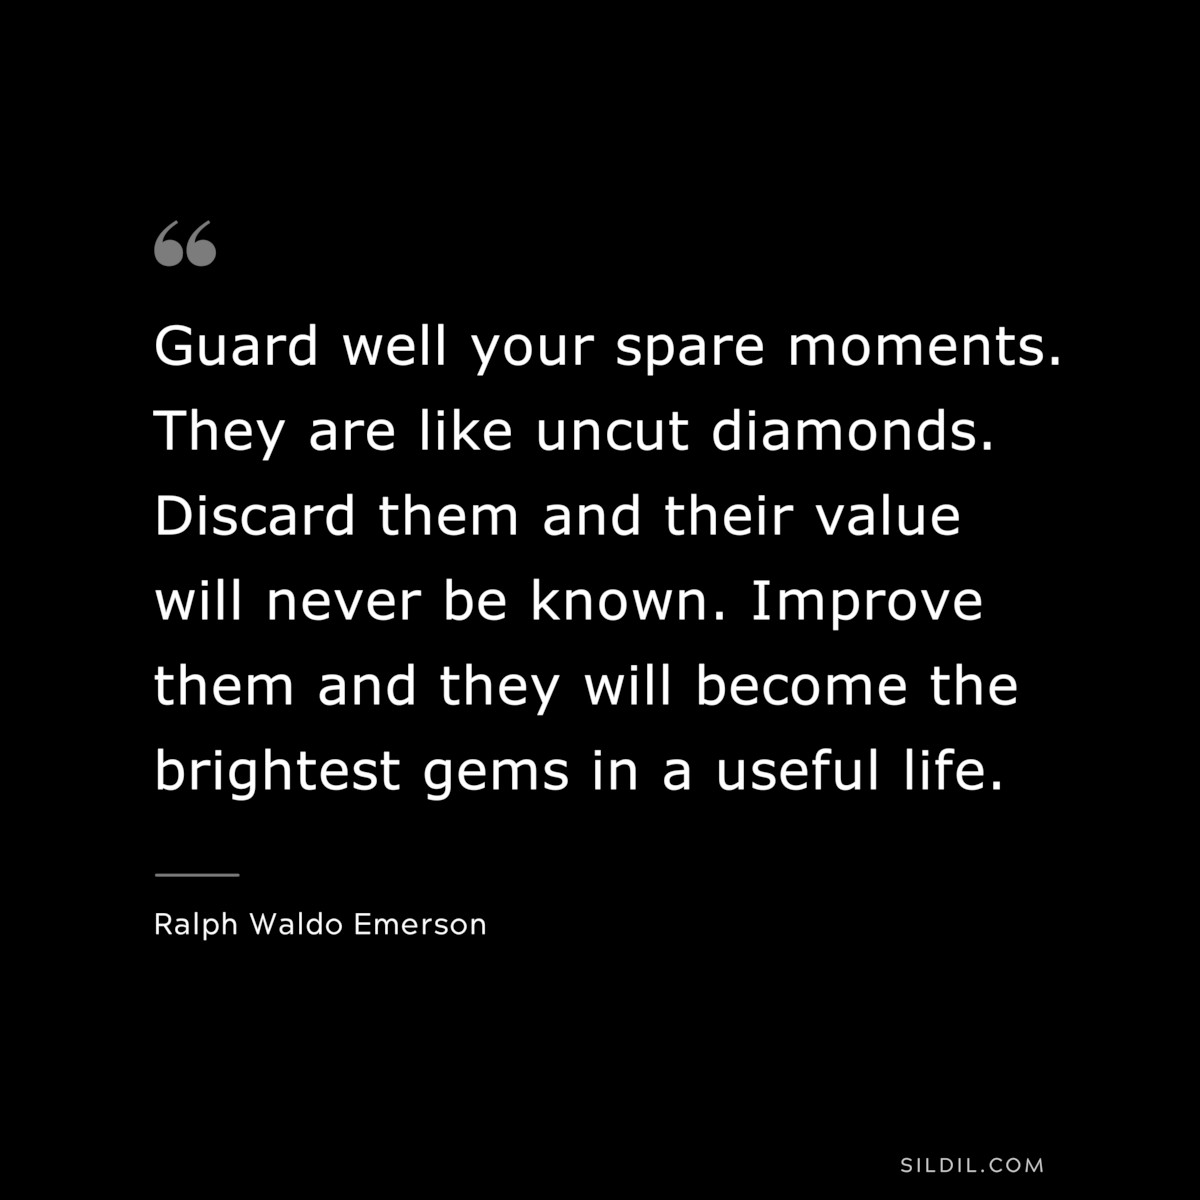 Guard well your spare moments. They are like uncut diamonds. Discard them and their value will never be known. Improve them and they will become the brightest gems in a useful life. — Ralph Waldo Emerson